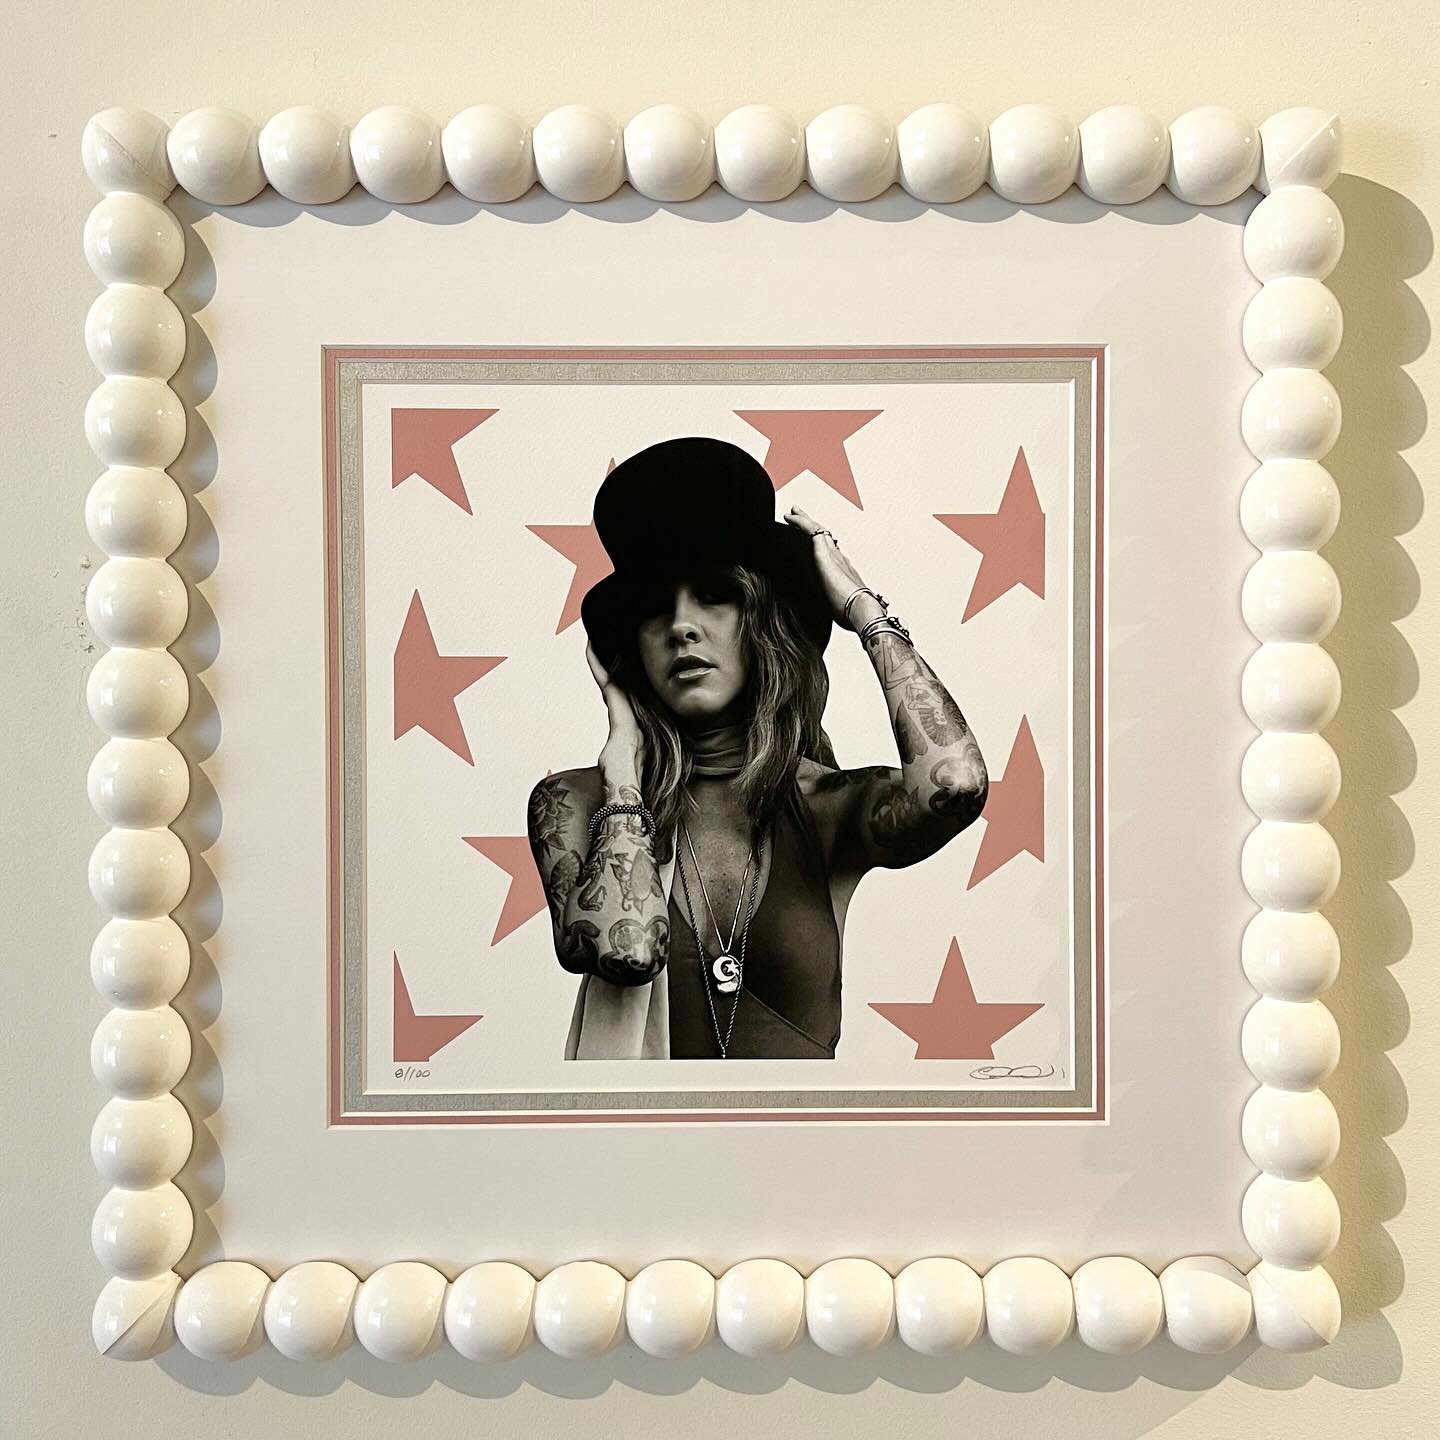 From the triple mat to the unique ball moulding, everything about this frame job for this Stevie Nicks print is absolutely perfect ✨